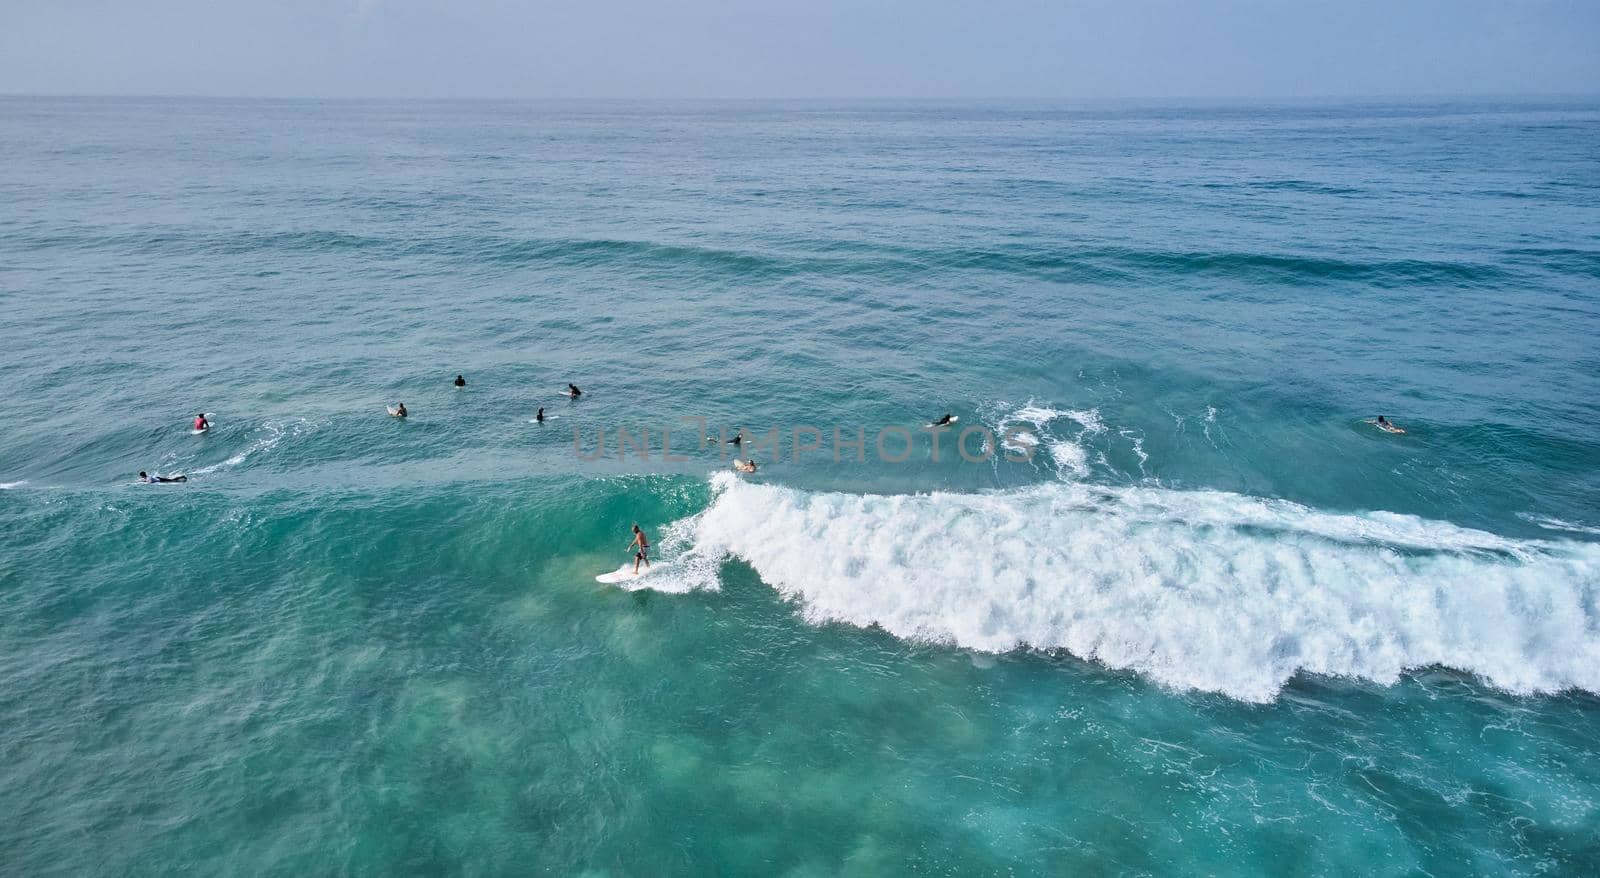 Aerial view of surfers waiting for the wave. Sri Lanka, Midigama by driver-s